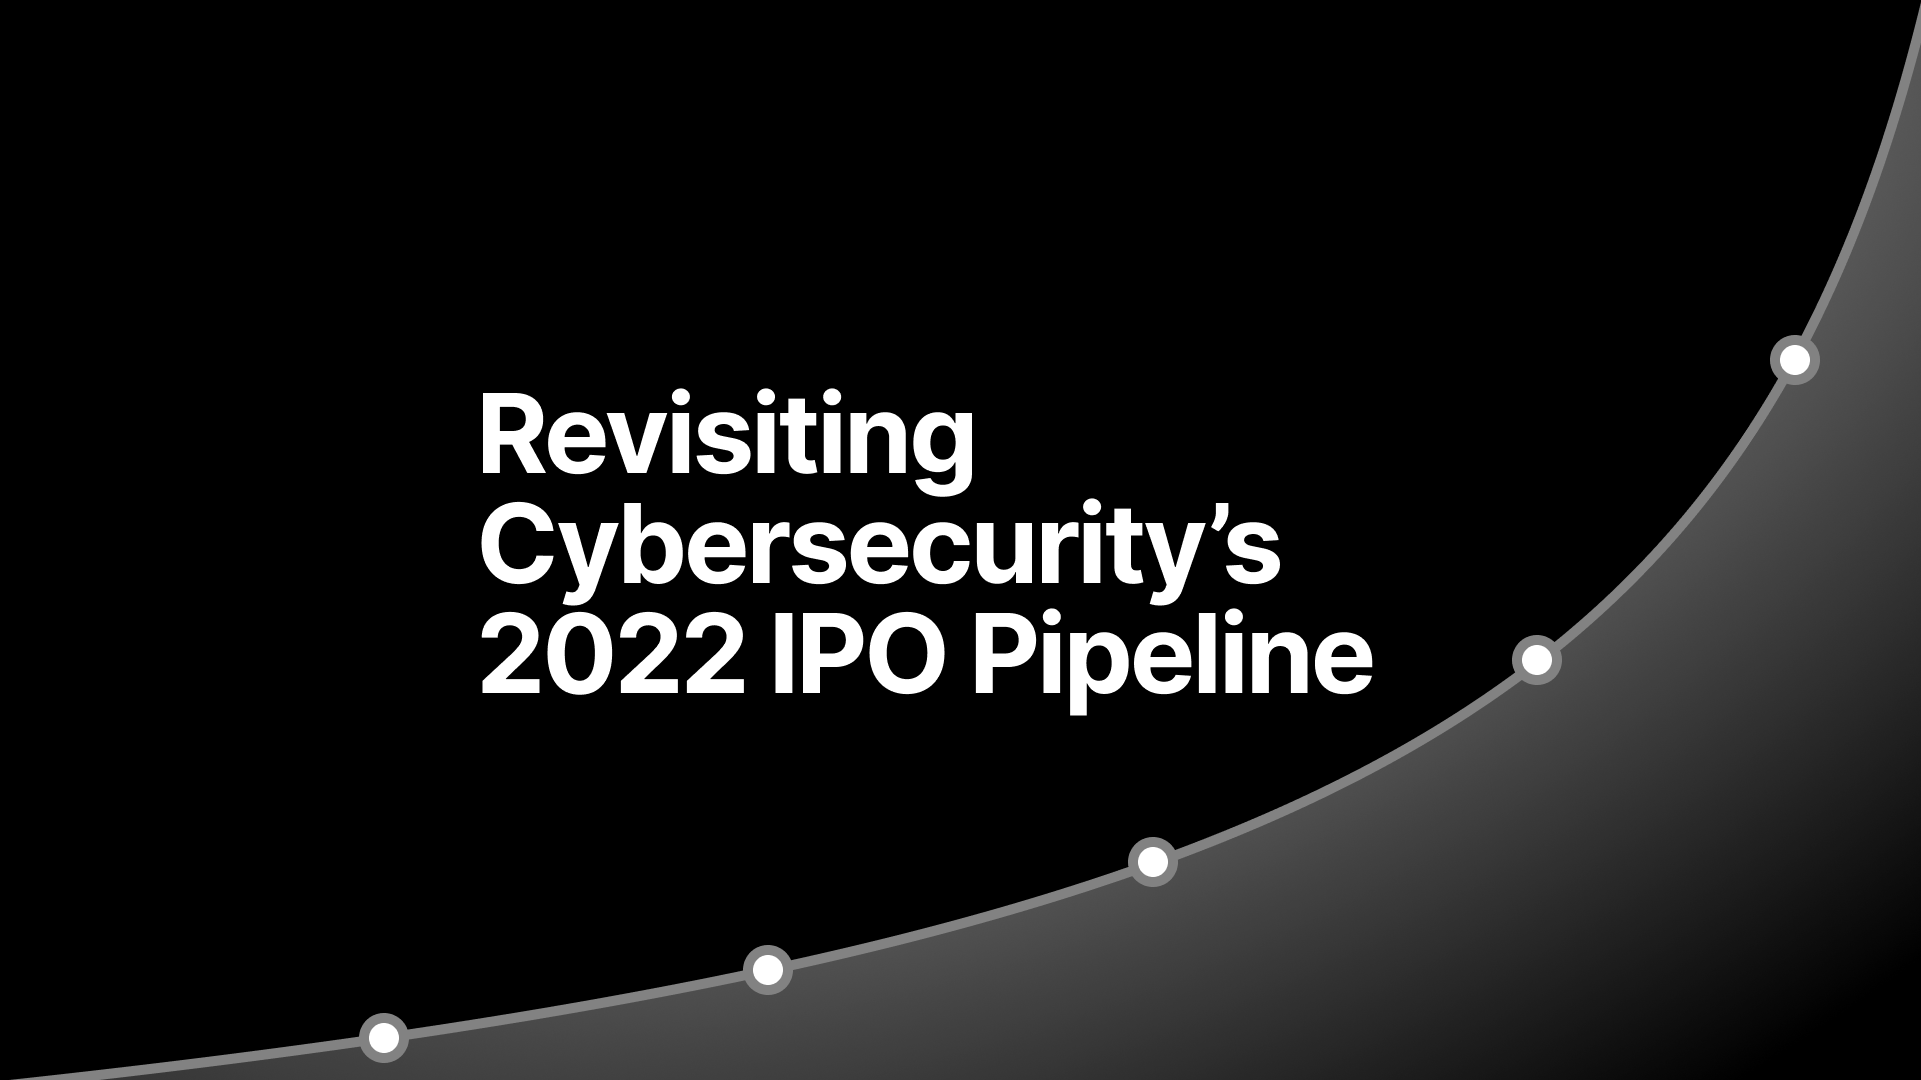 Revisiting Cybersecurity's 2022 IPO Pipeline